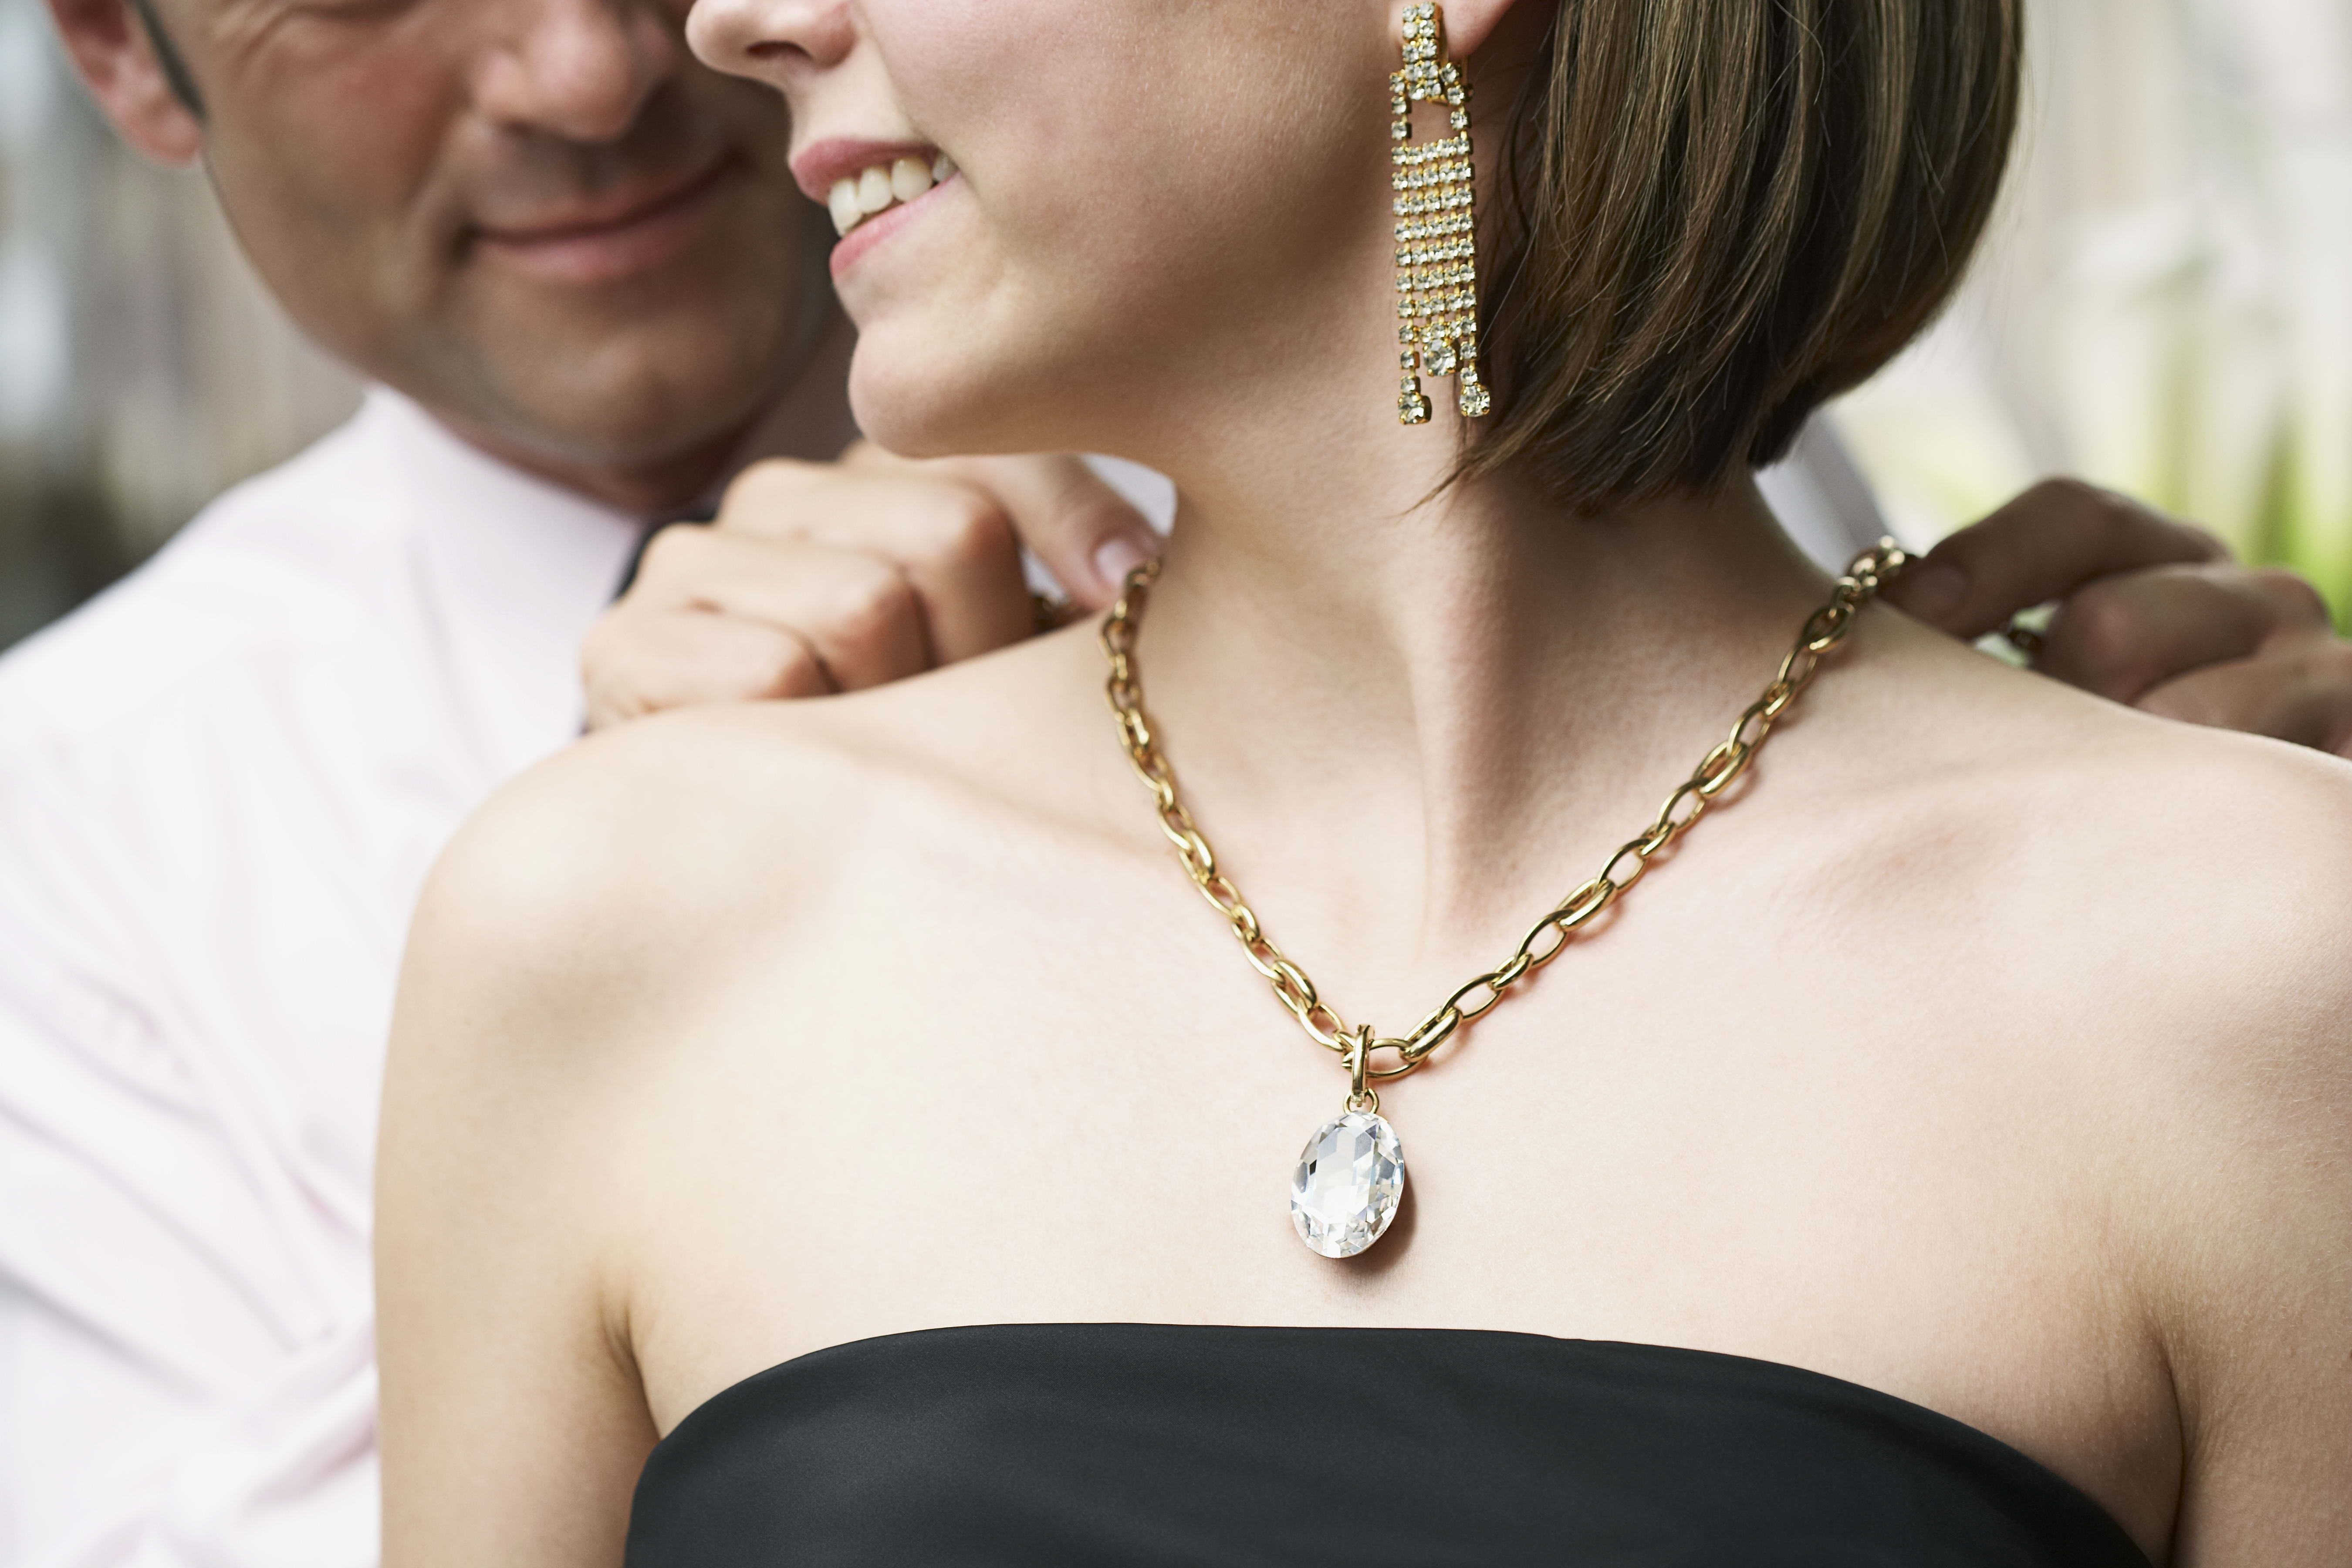 woman wearing black tube-type top with gold-colored chain link necklace with white gemstone pendant